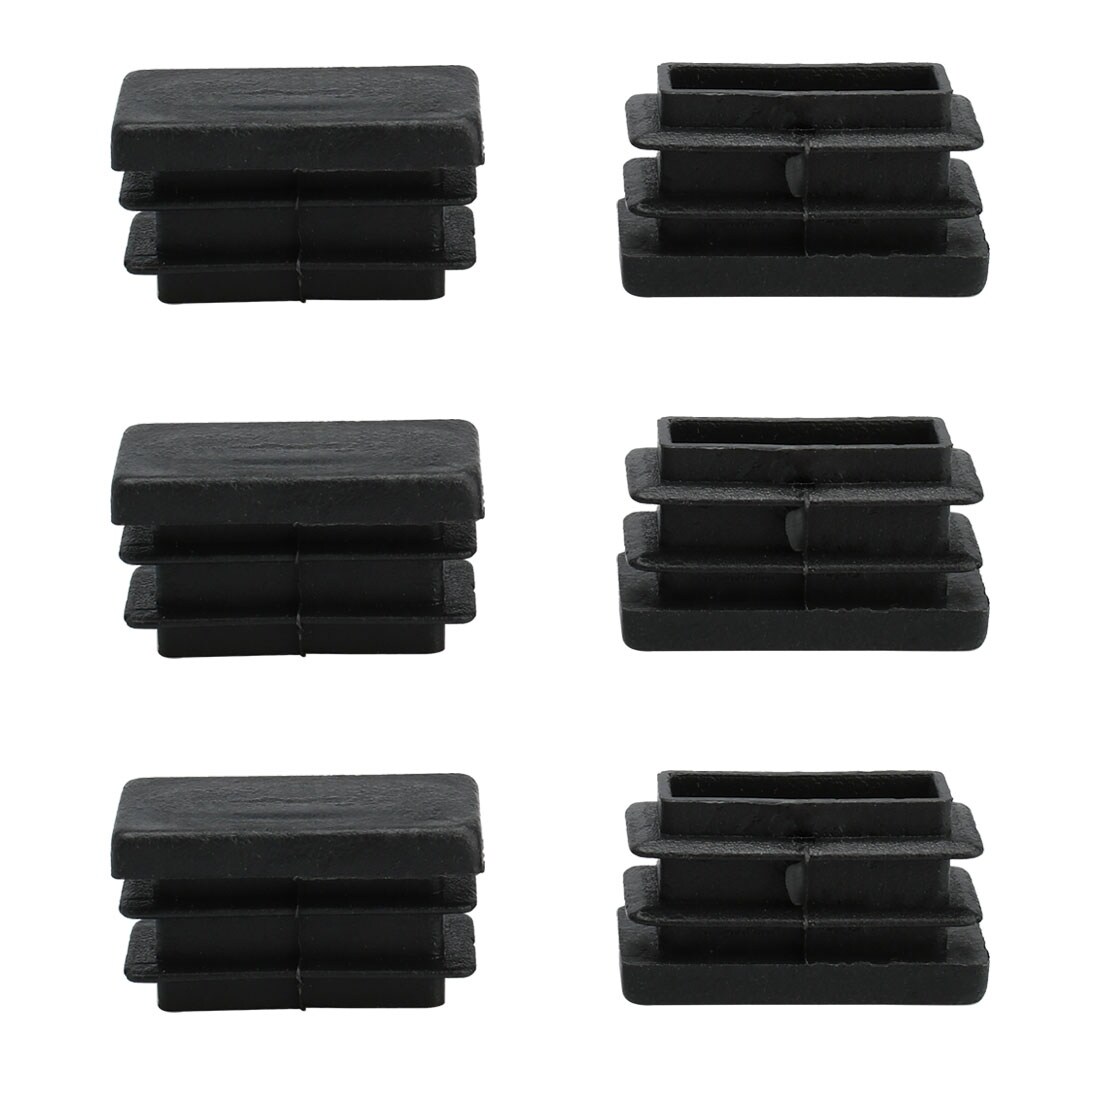 13 x 26mm Plastic Rectangle Ribbed Tube Inserts End Cover Cap Table Feet 25pcs